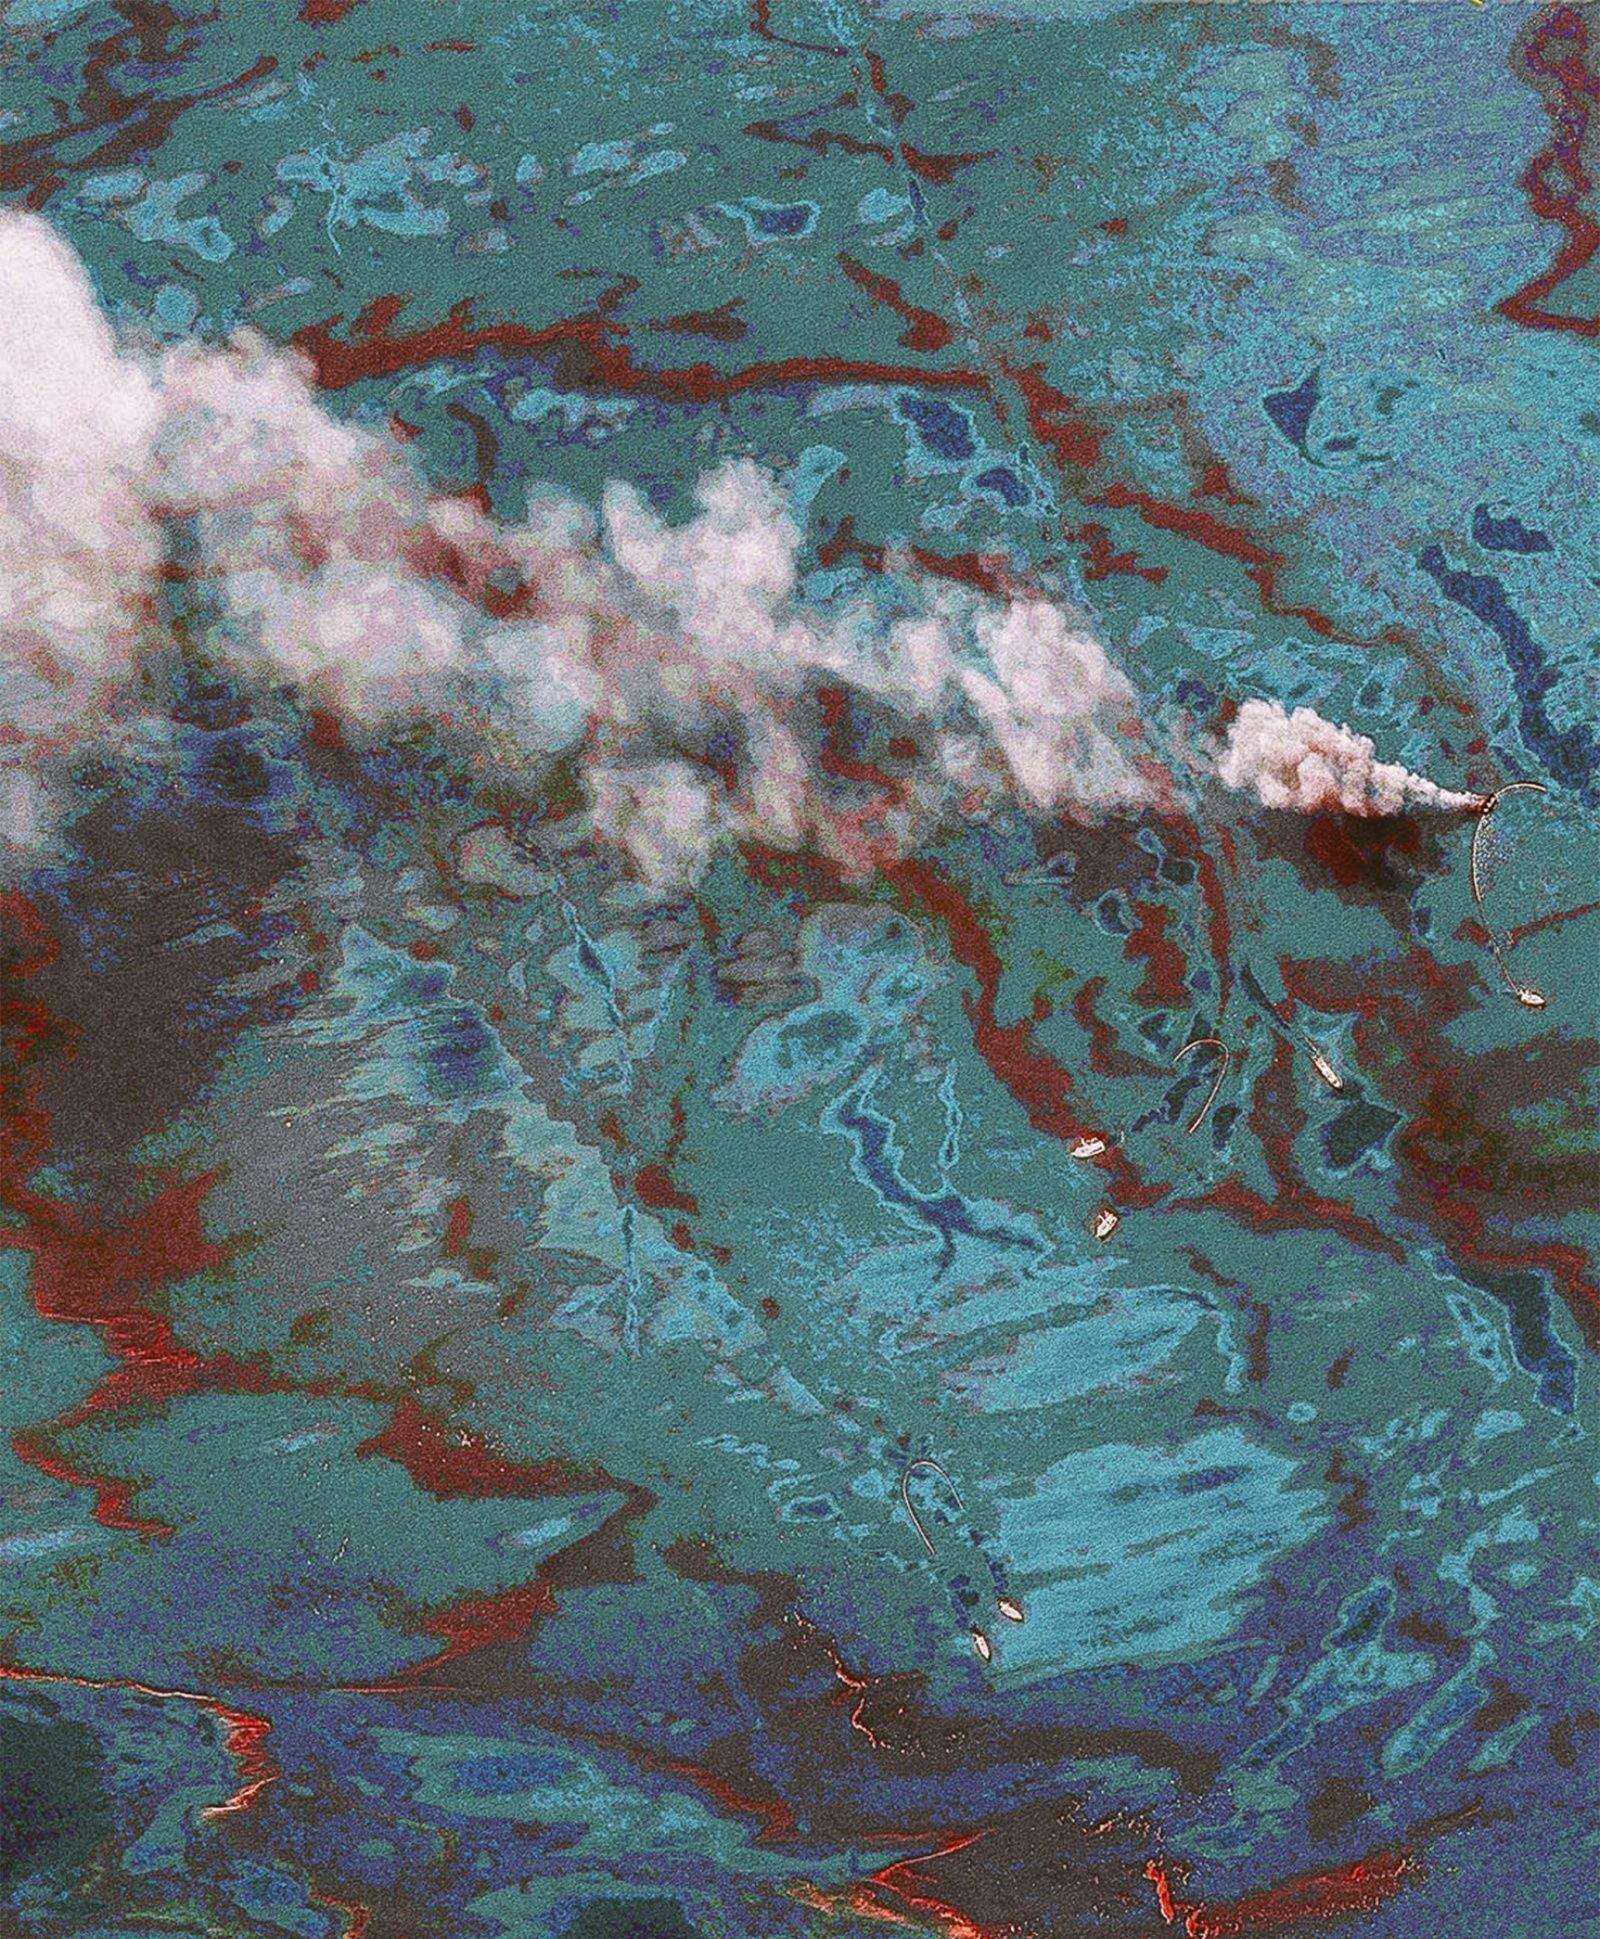 Satellite image showing cleanup in the Gulf of Mexico. (Photo downloaded from aerialwallpapers.tumblr.com)